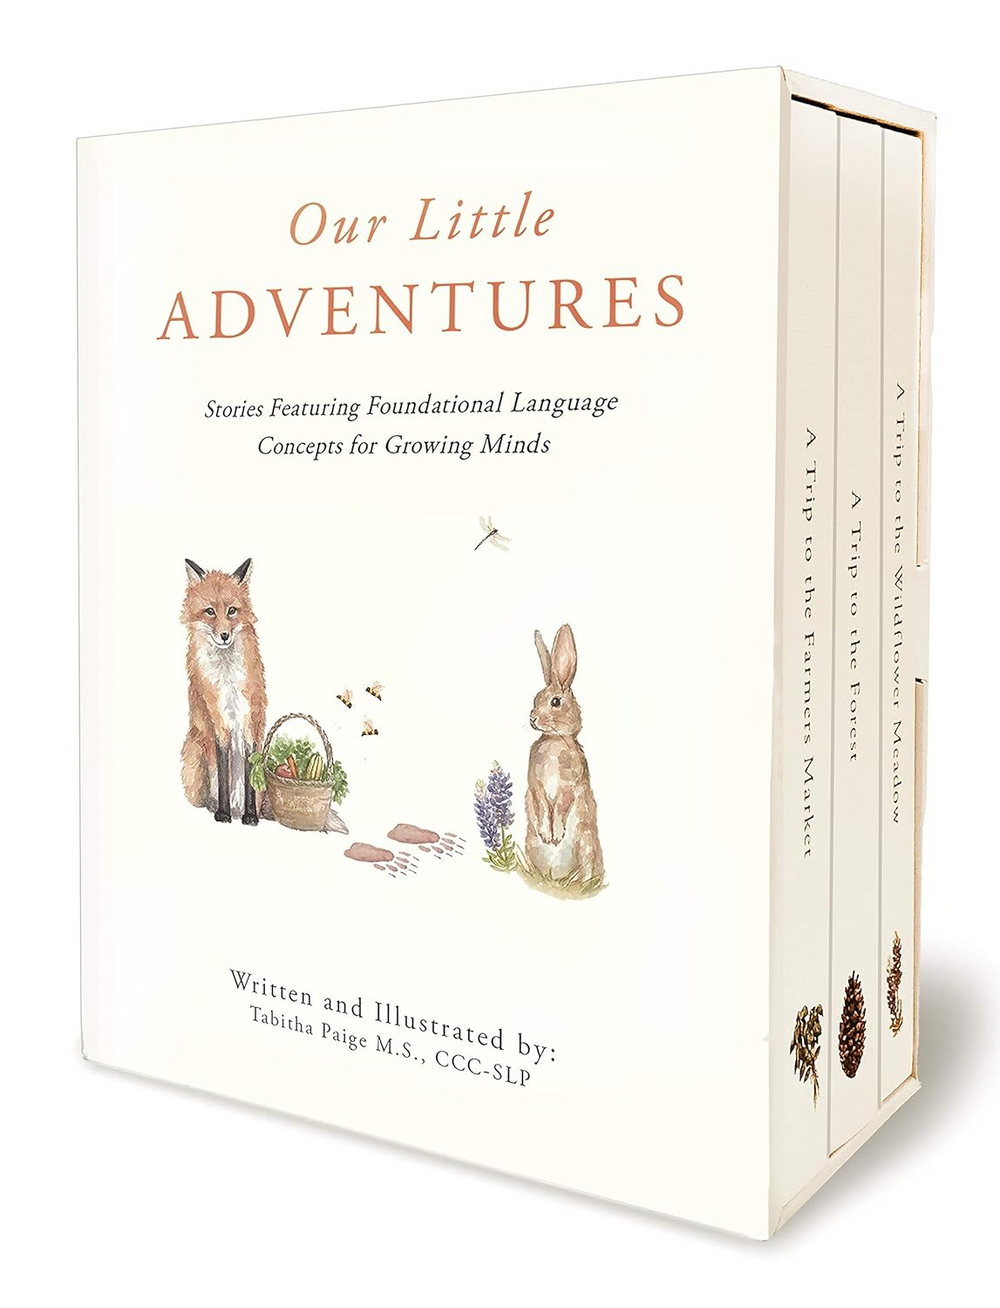 Our Little Adventures - Stories Featuring Foundational Language Concepts for Growing Minds